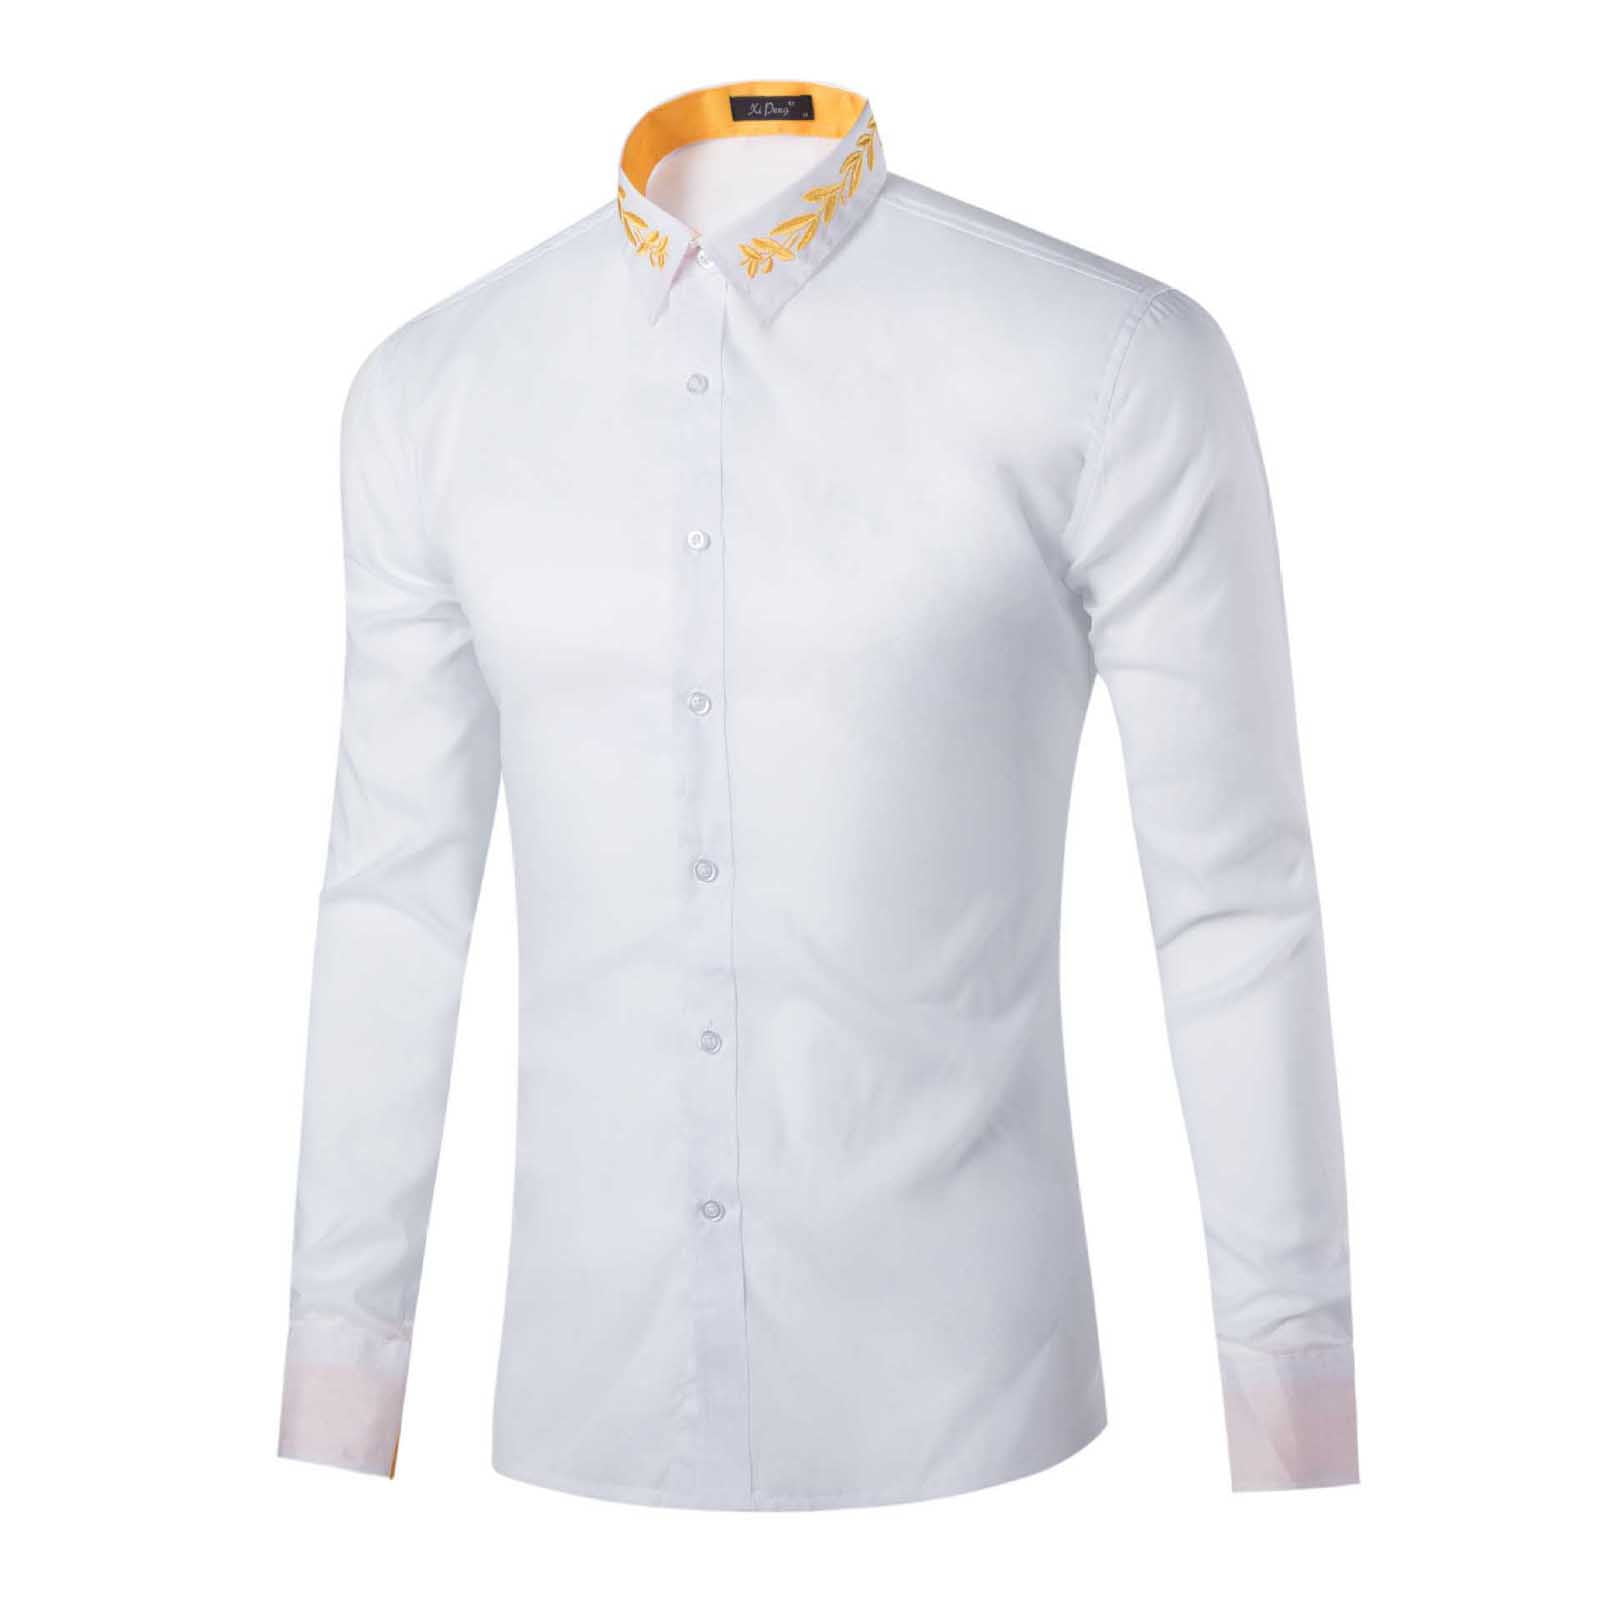 VSSSJ Shirts for Men Big and Tall Fashion Neckline Embroidery Long